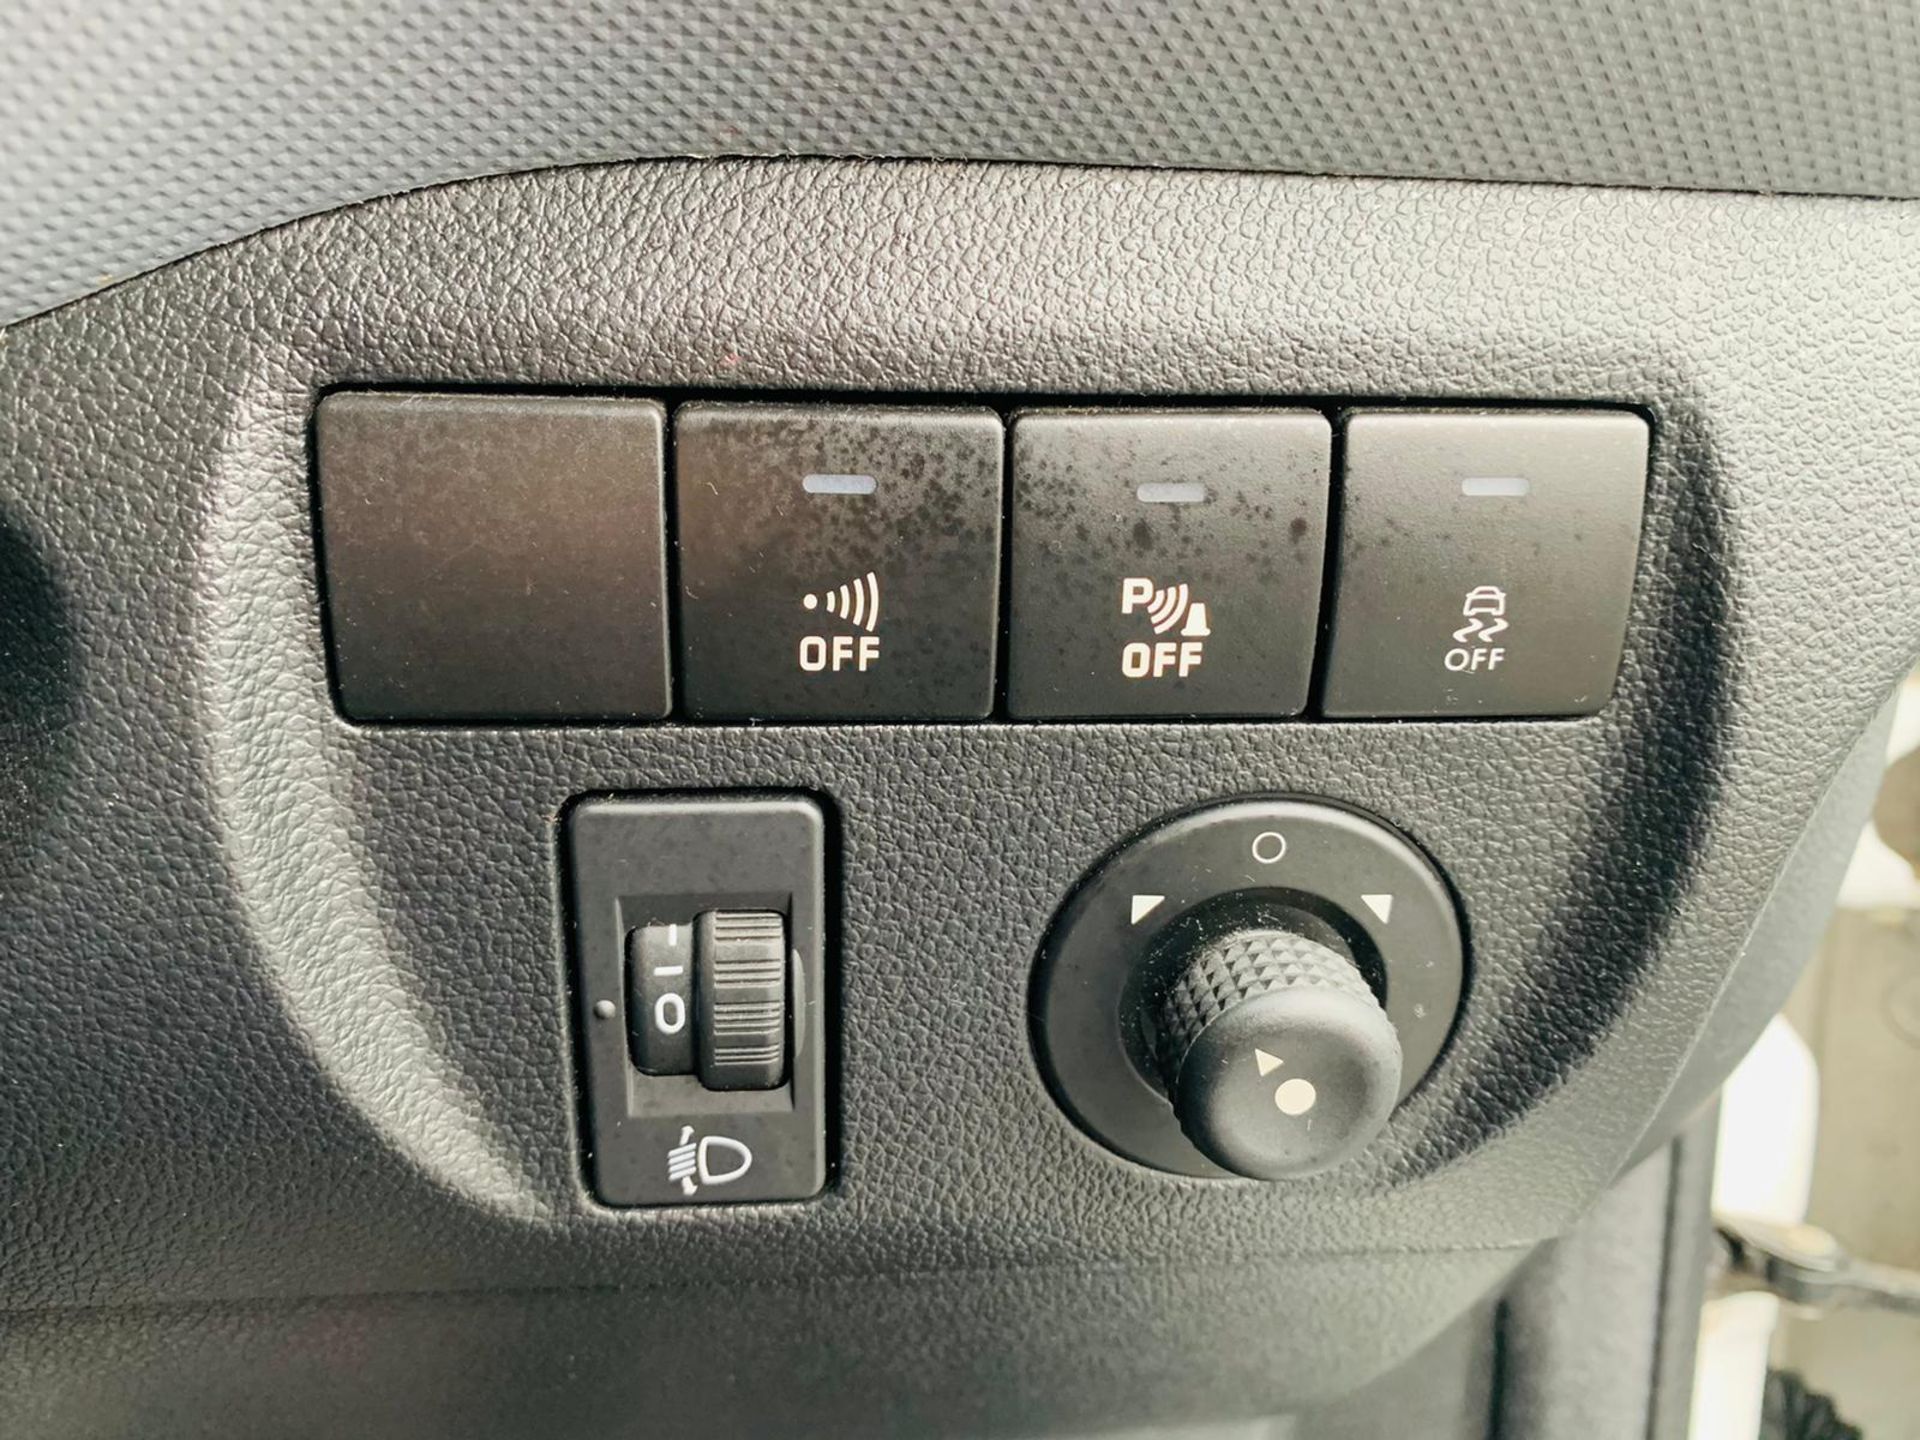 (RESERVE MET) Peugeot Partner 1.6 HDI Professional - 2017 Model - Air Con - Service History - Image 19 of 22